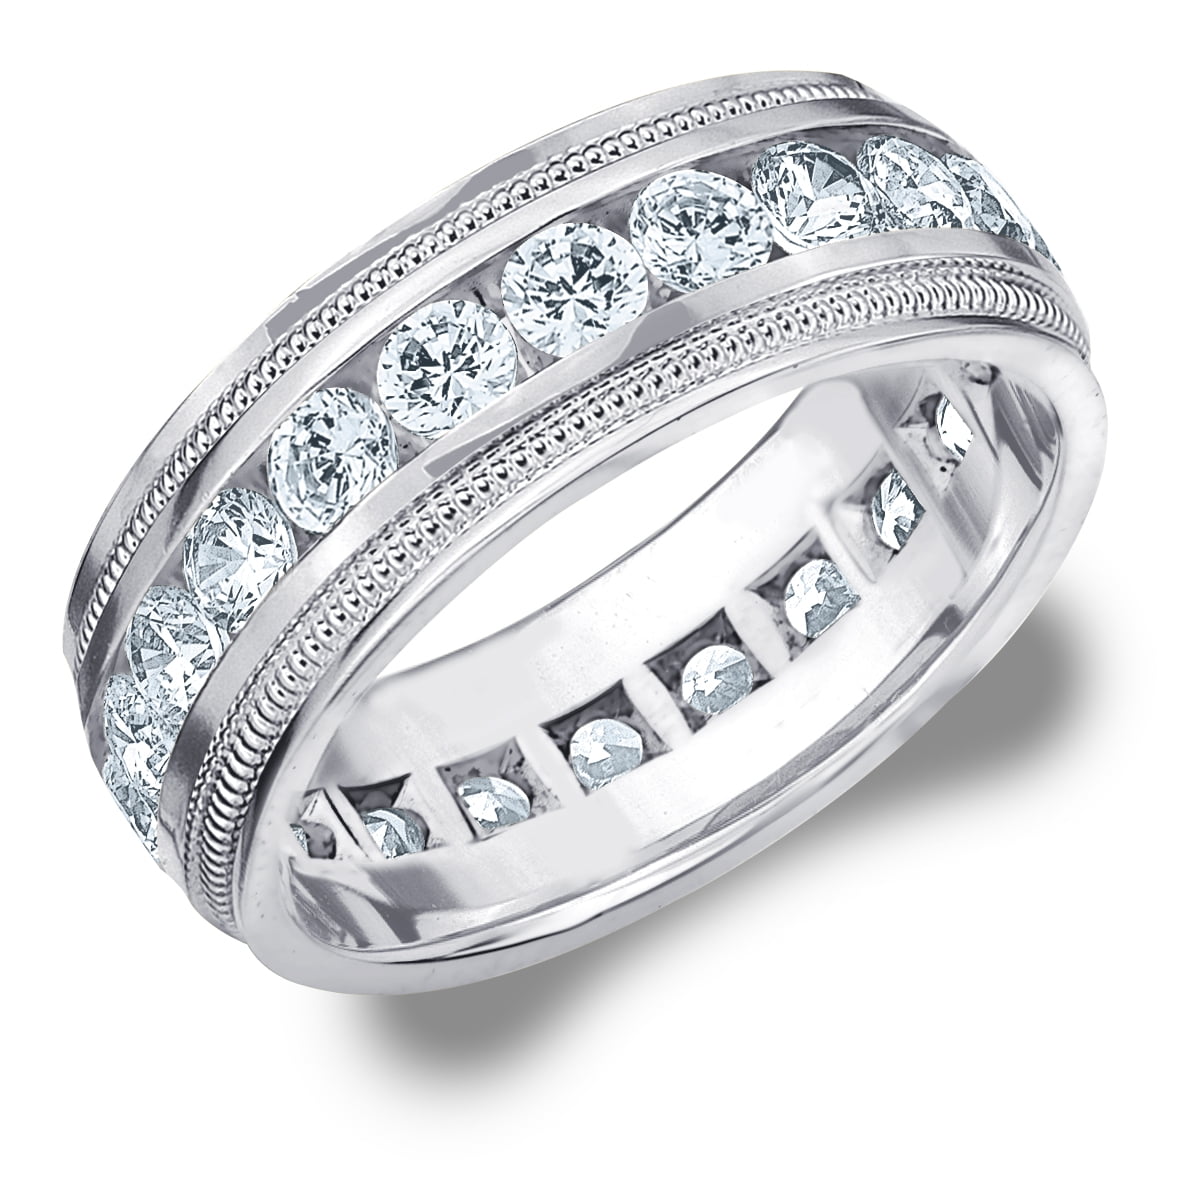 White gold male wedding bands